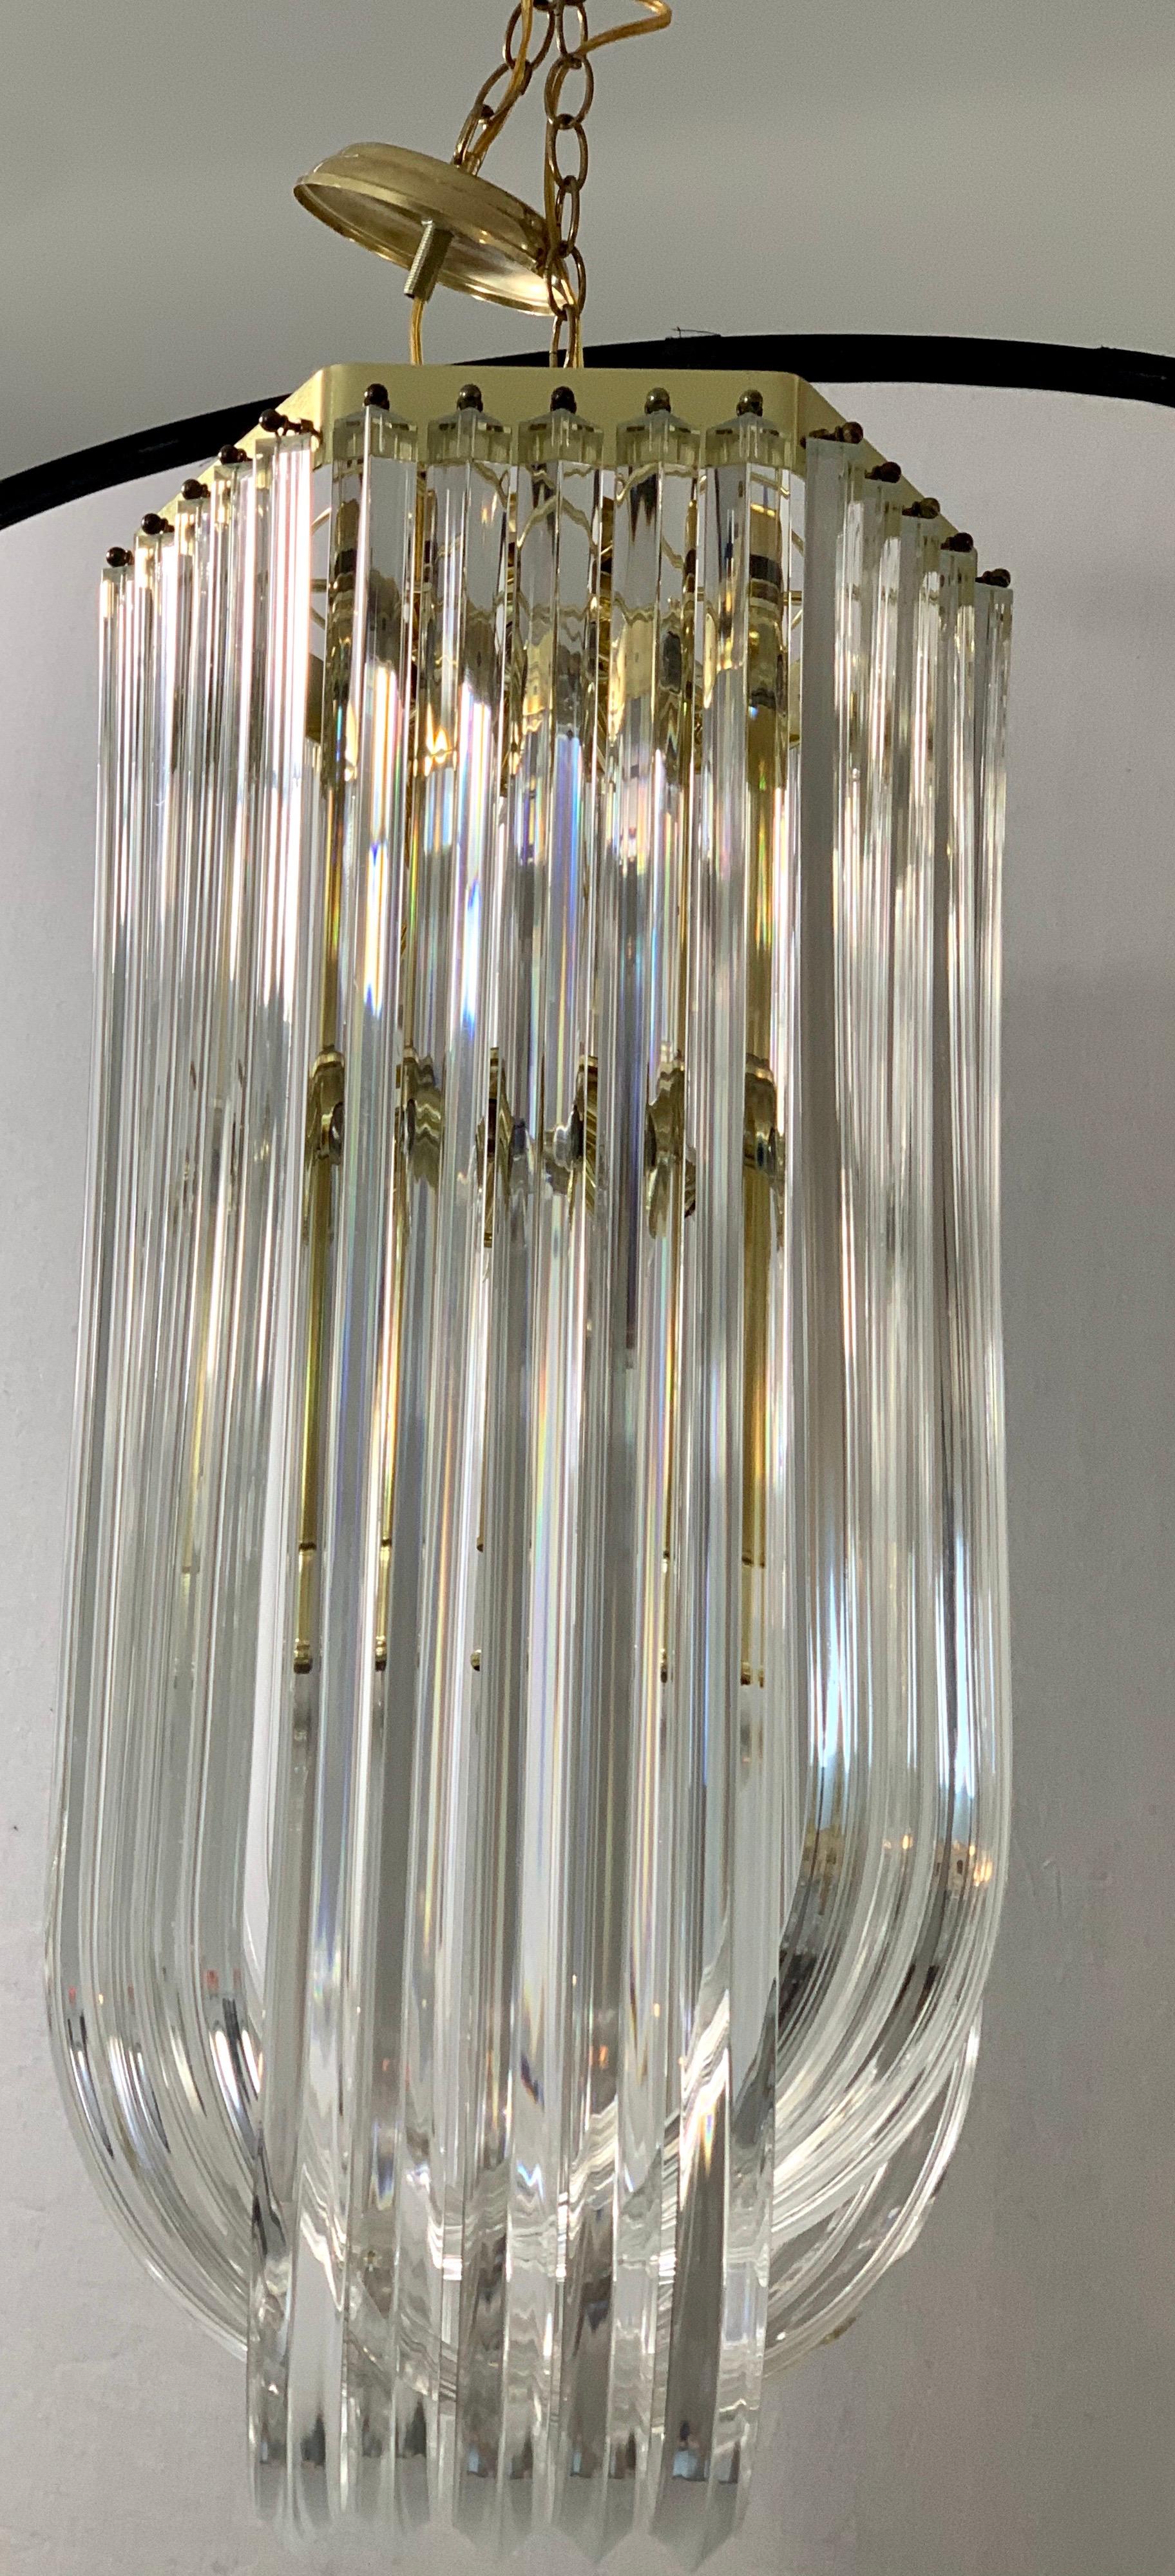 Late 20th Century Mid-Century Modern Tall Sculptural Curved Lucite Chandelier For Sale